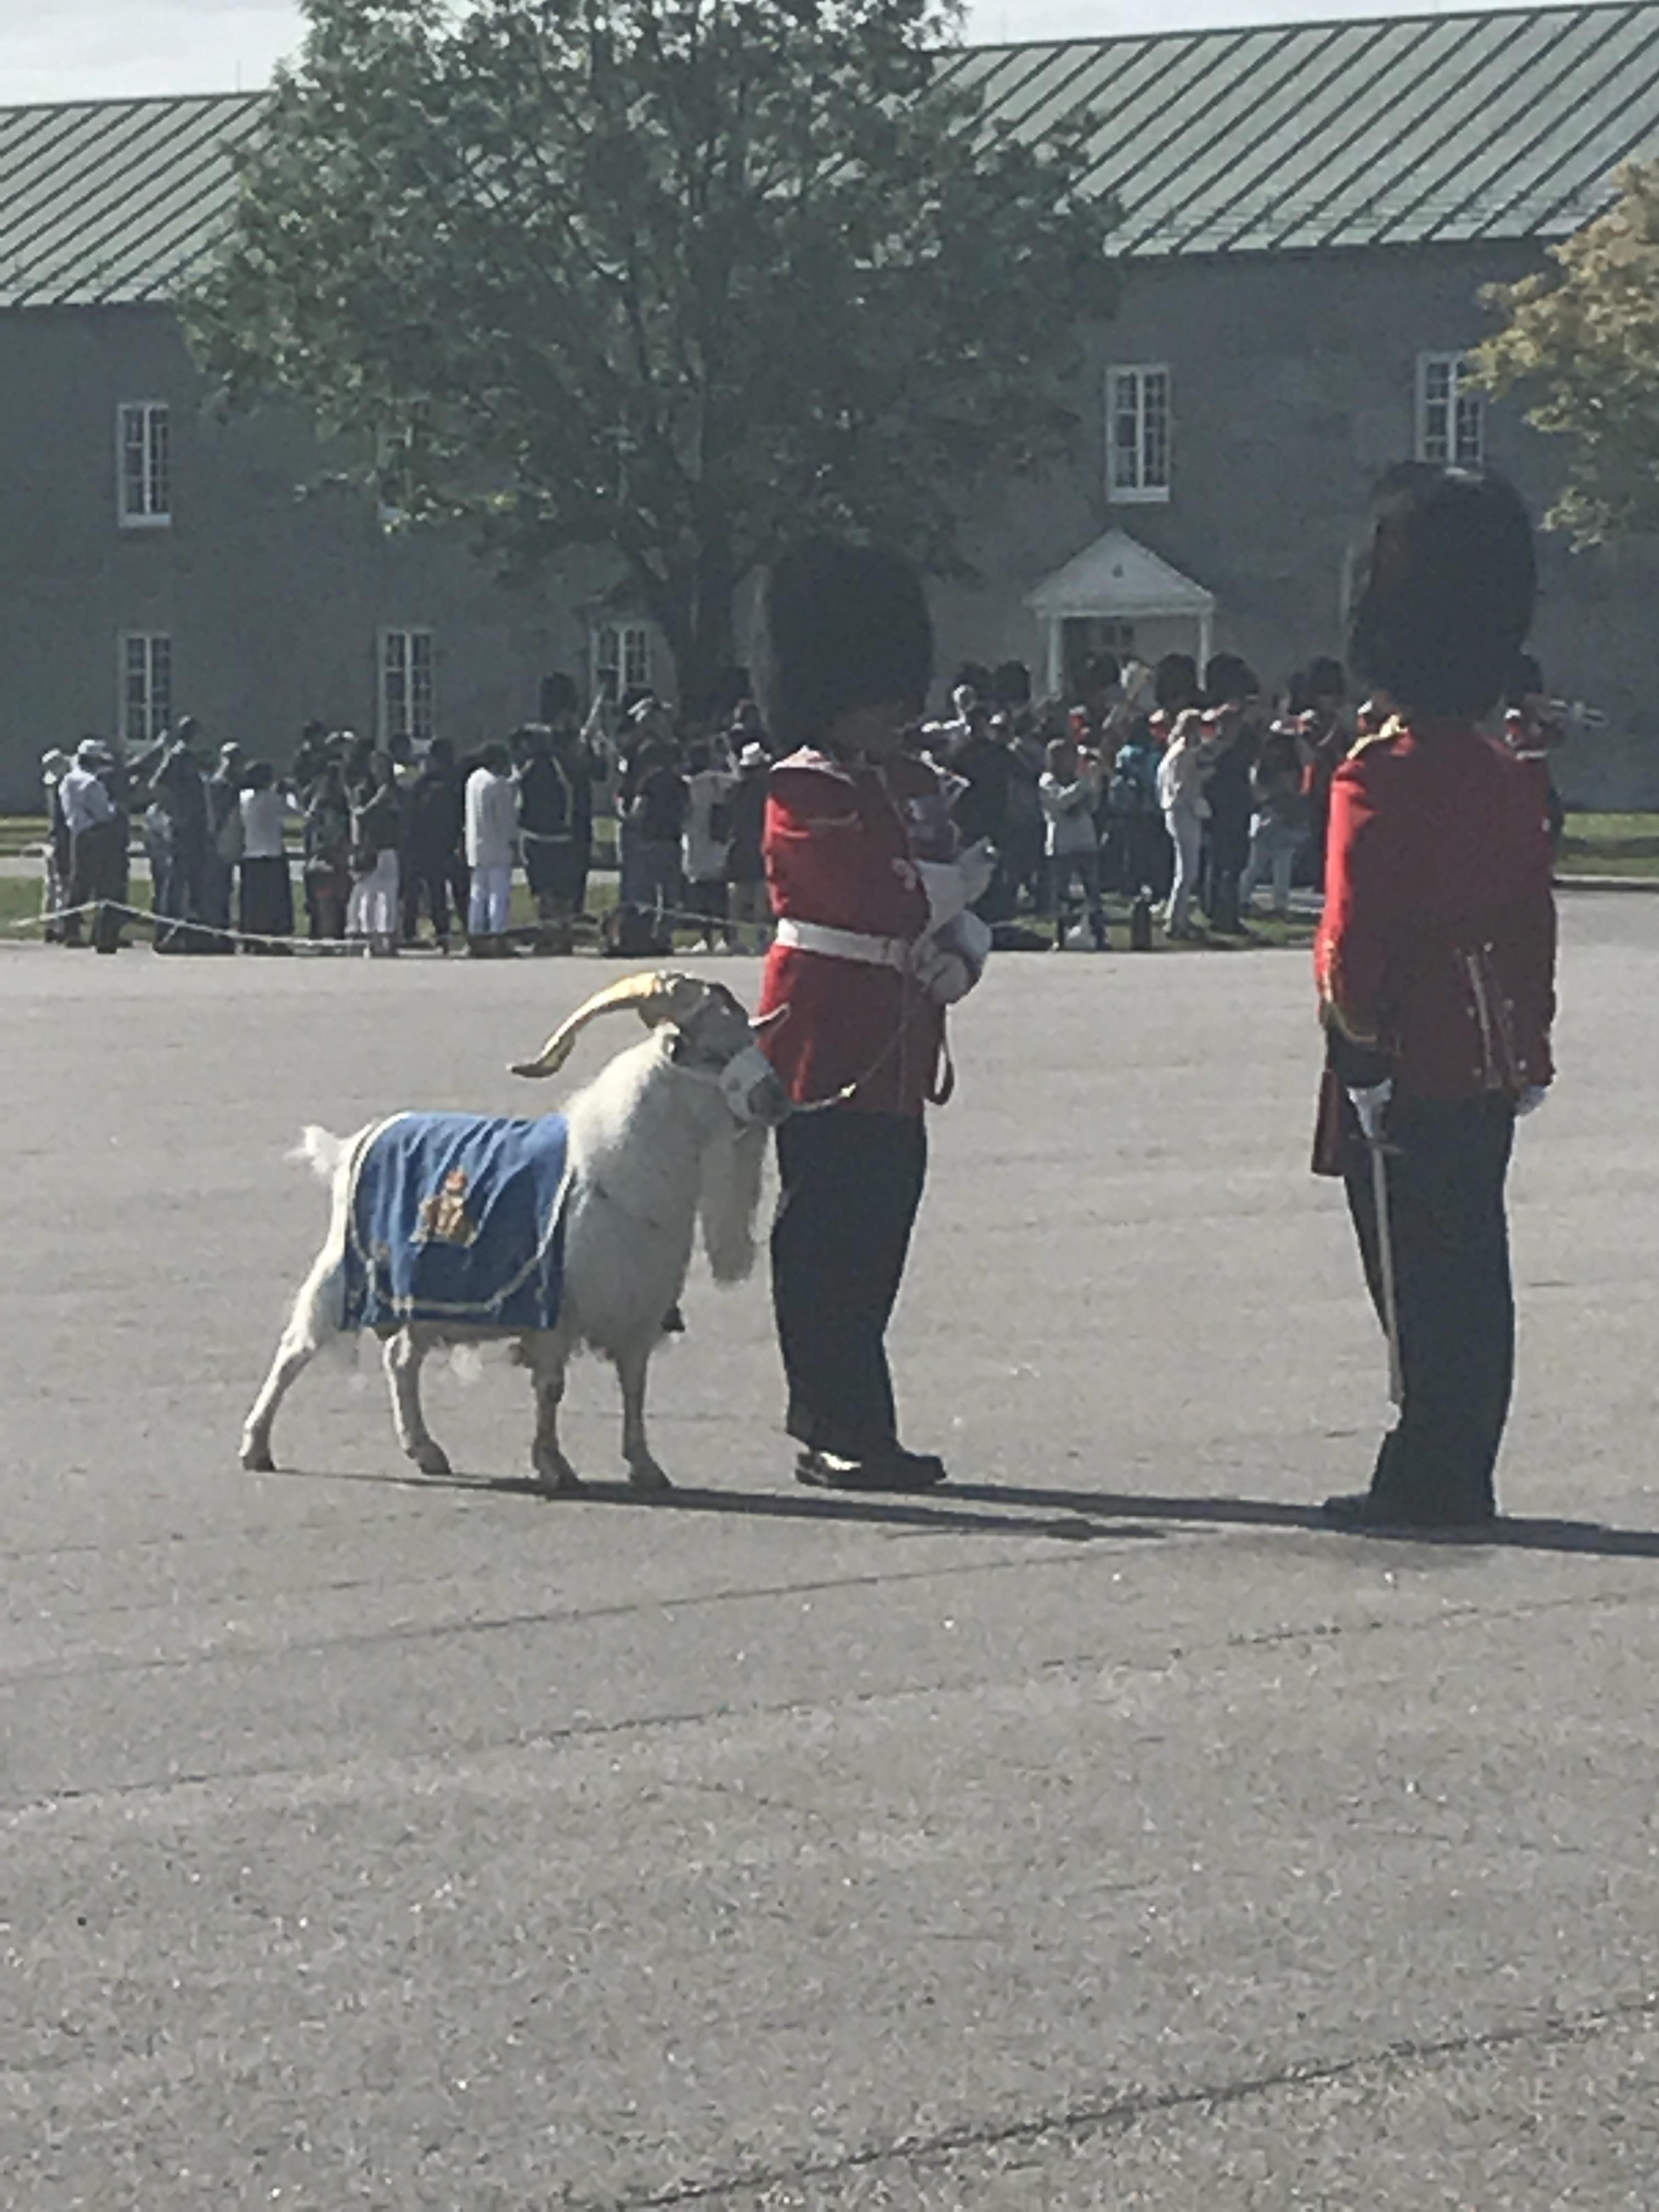 I am at the citadel in Quebec City Canada for the changing of the guard ceremony. Our military owns a goat that goes on parade with them everyone morning. This makes me feel more Canadian than ever.